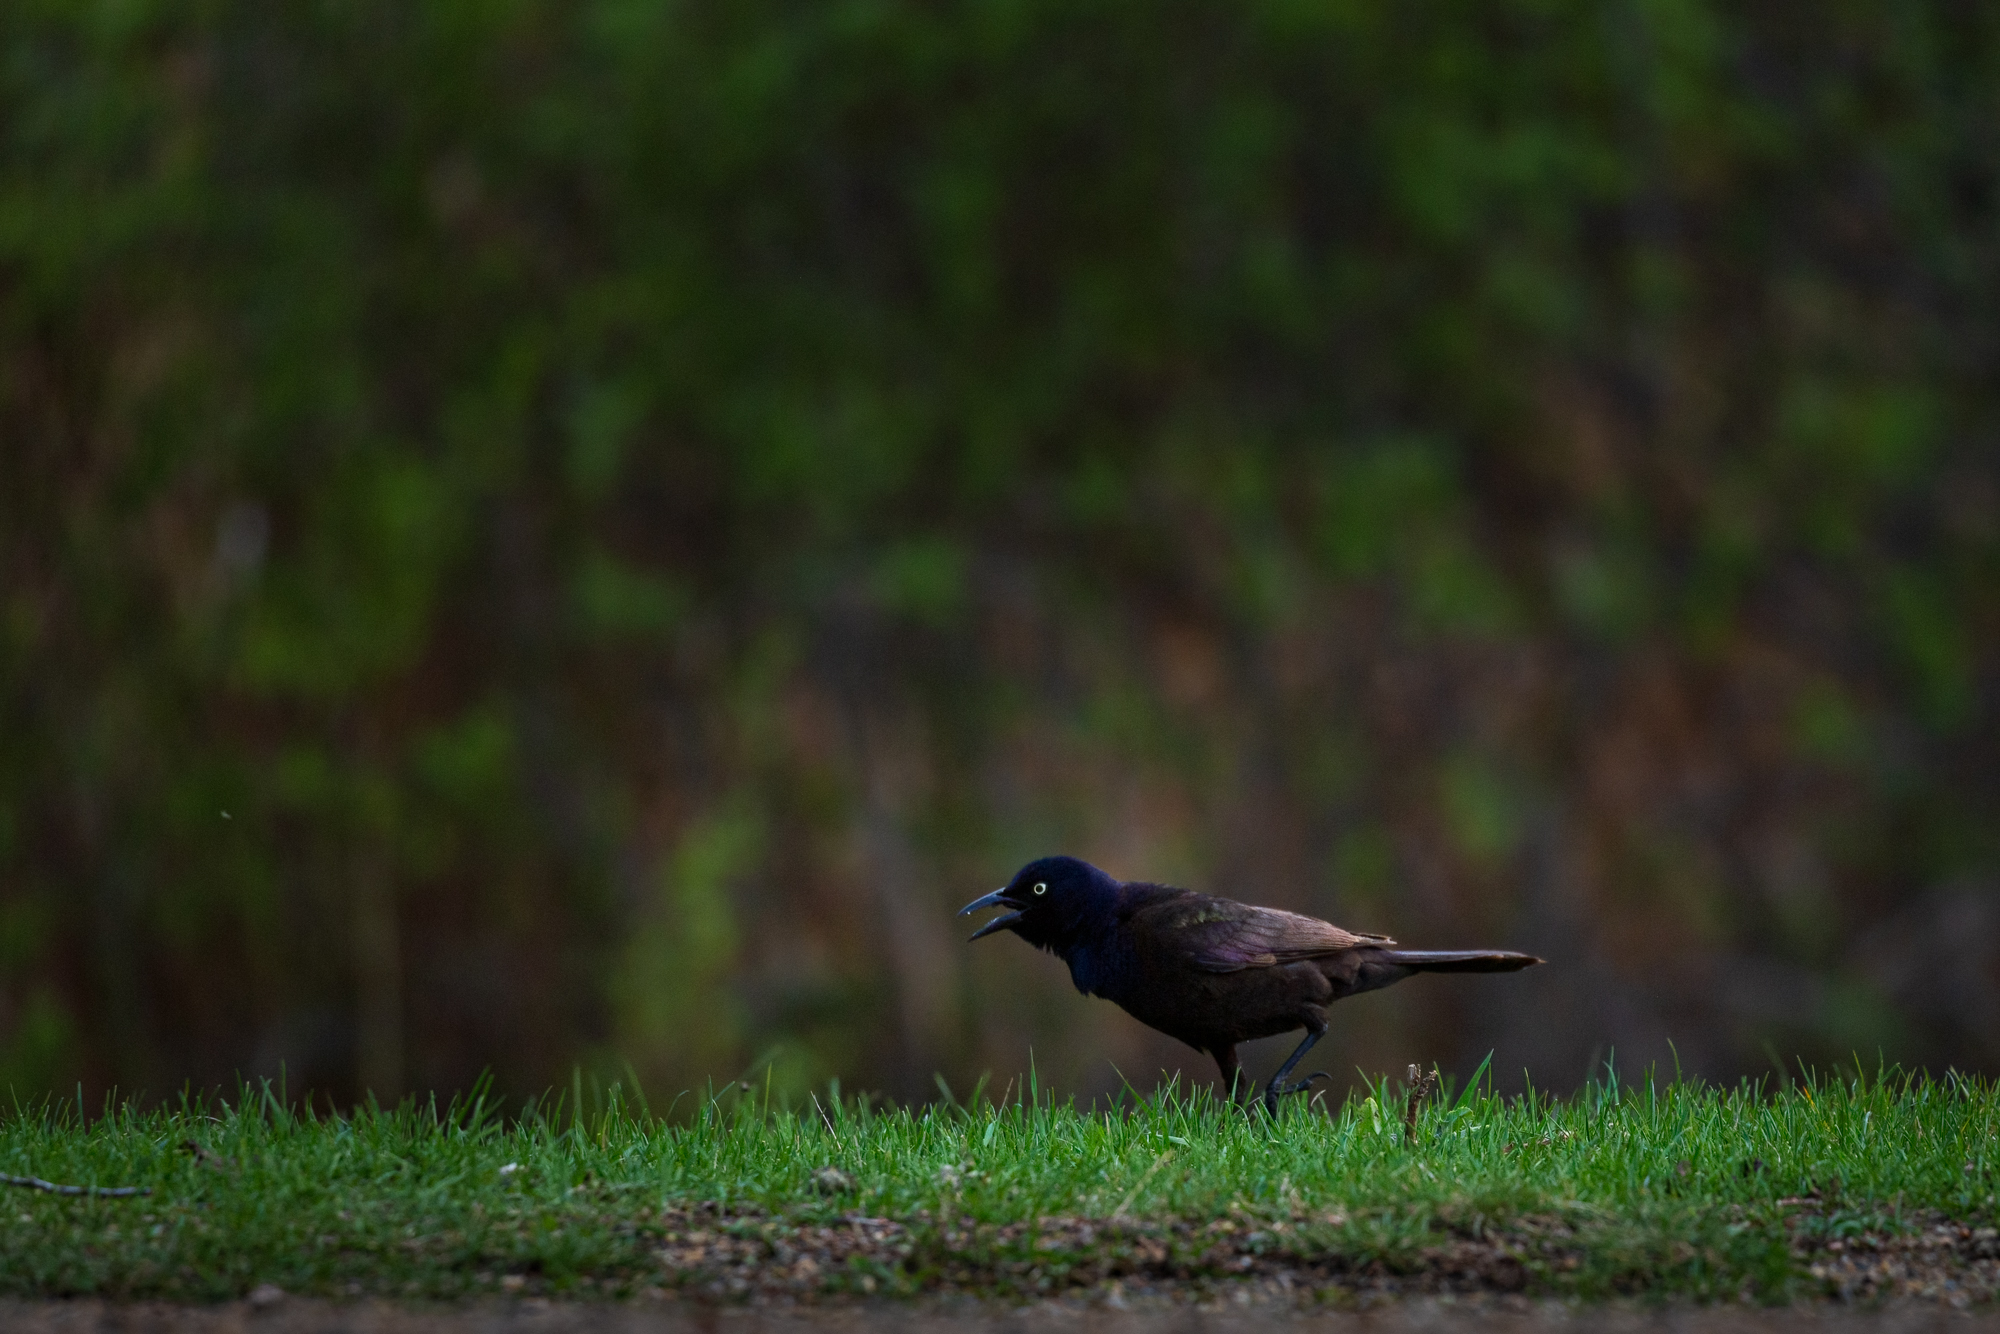 Common Grackle on the grass